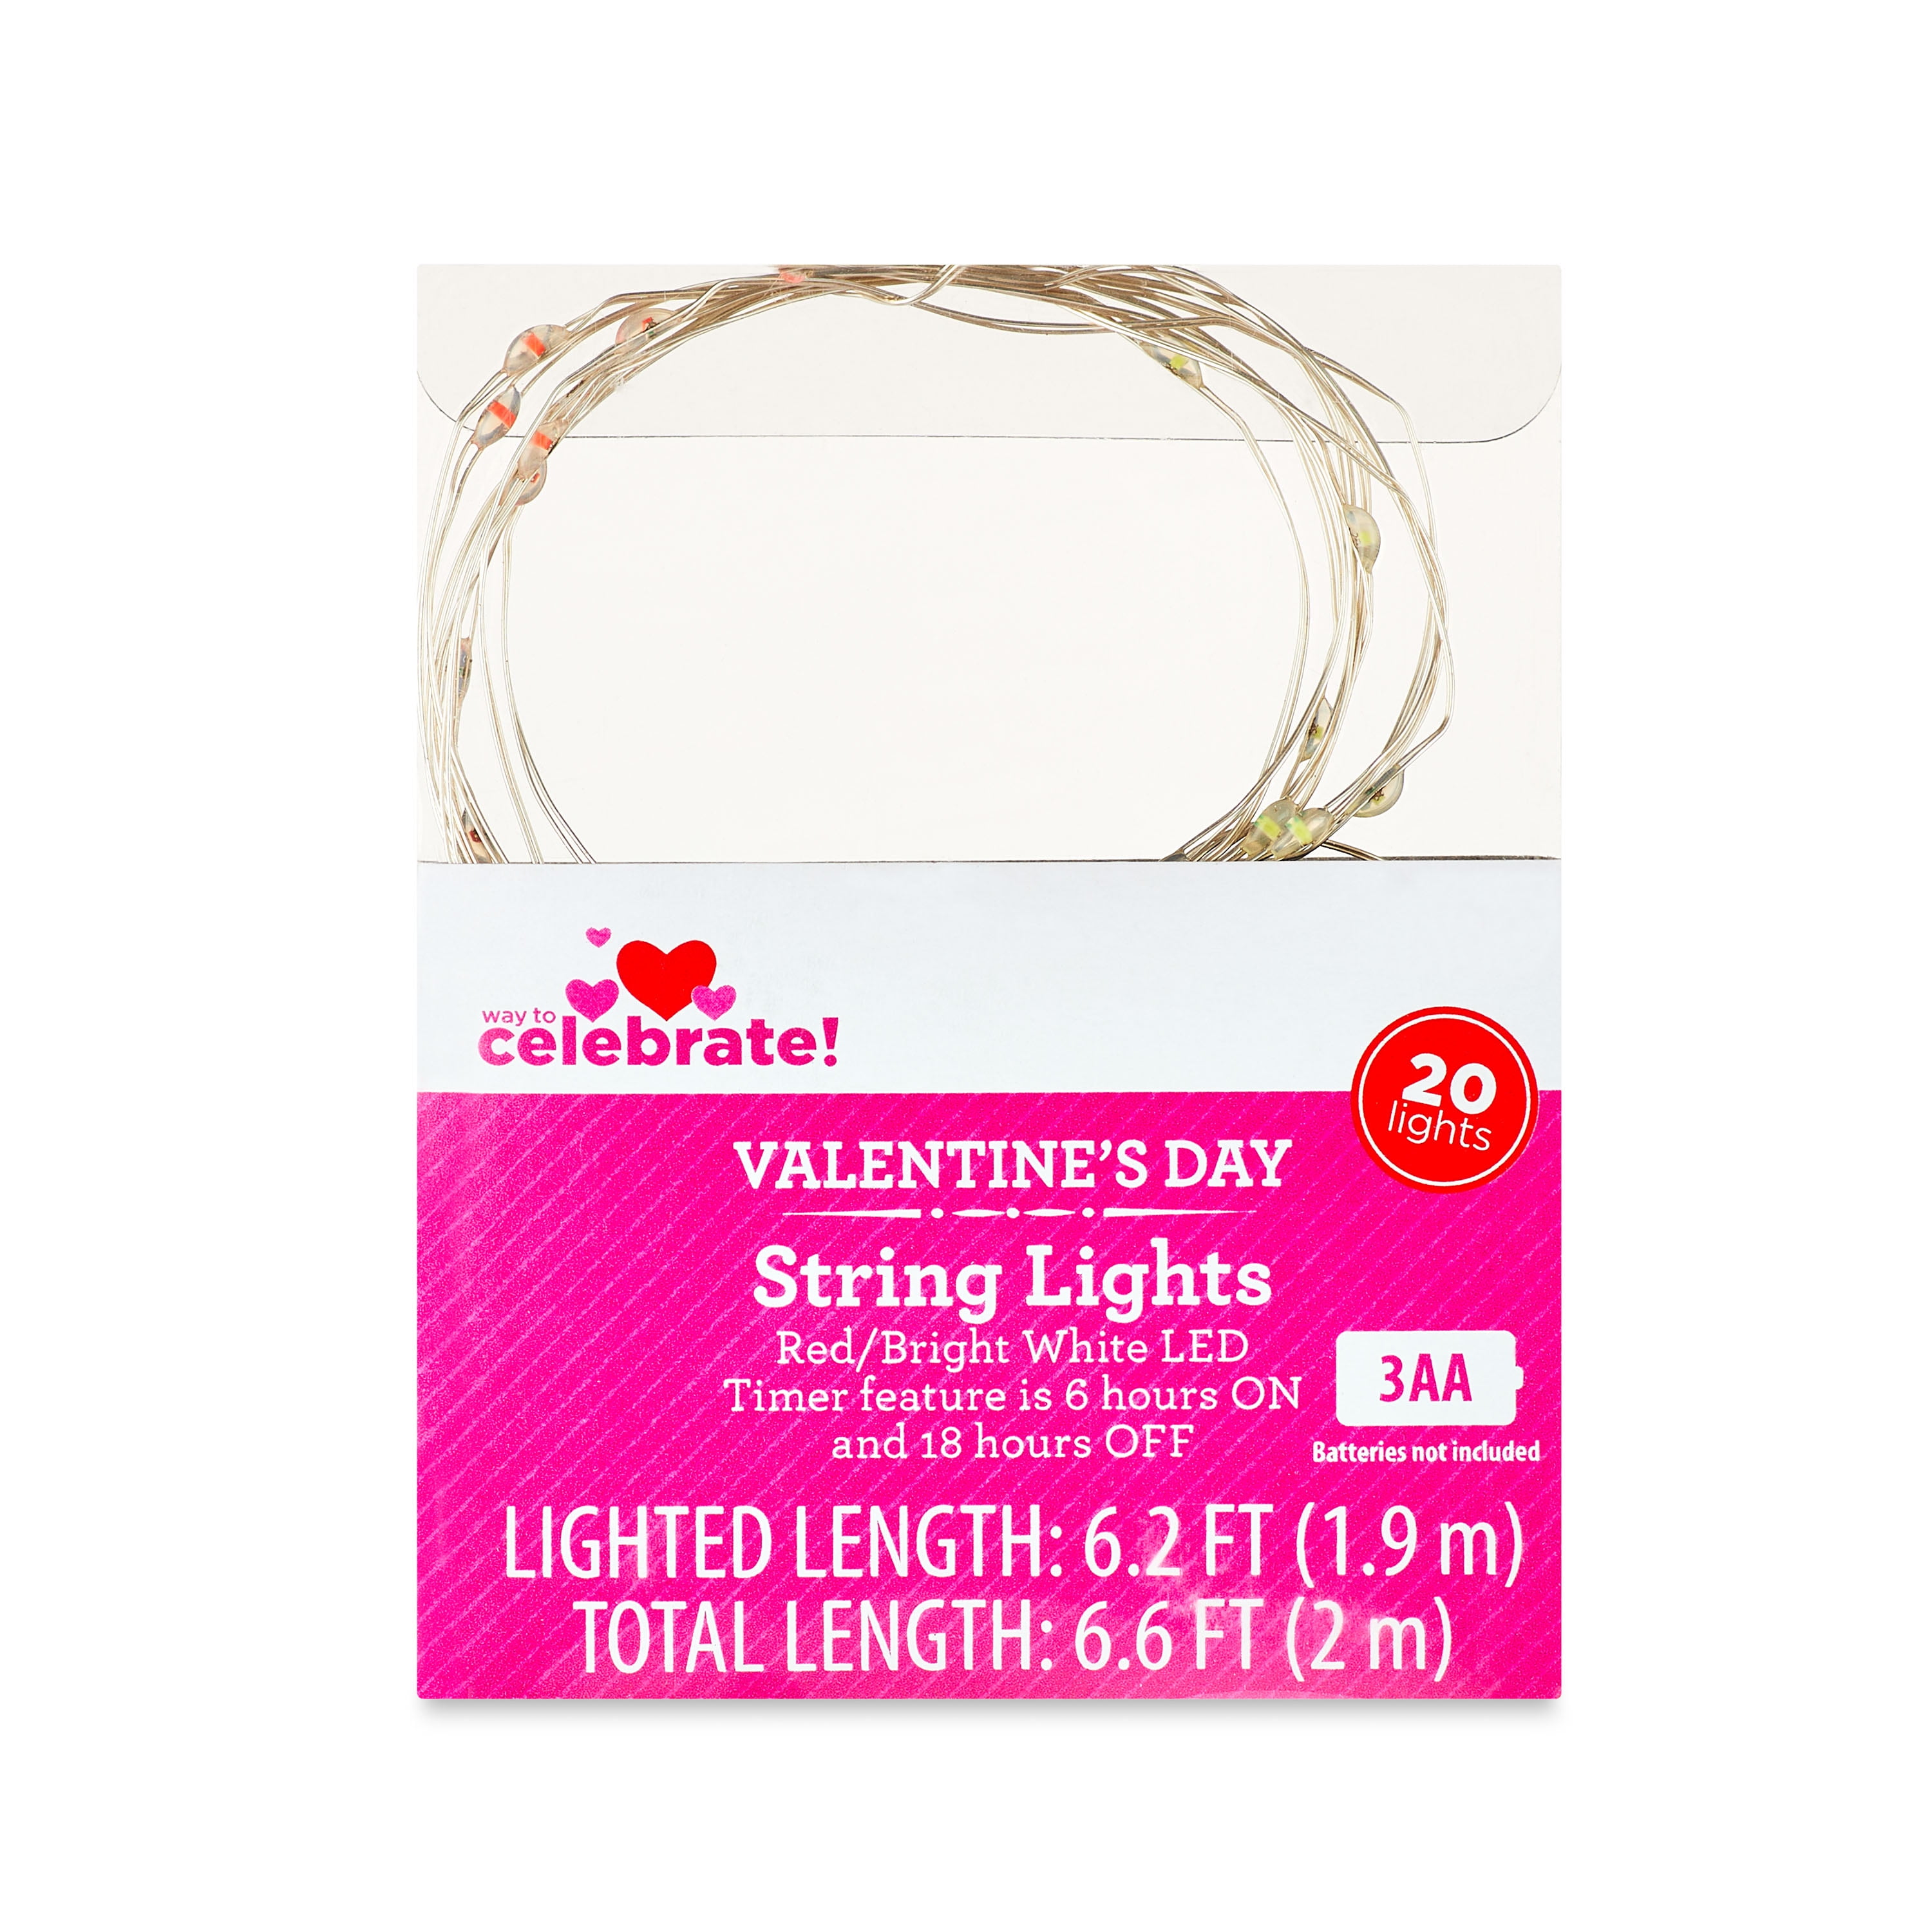 WAY TO CELEBRATE! Way To Celebrate Valentine’s Day Red & Bright White LED String Lights, 6.6'